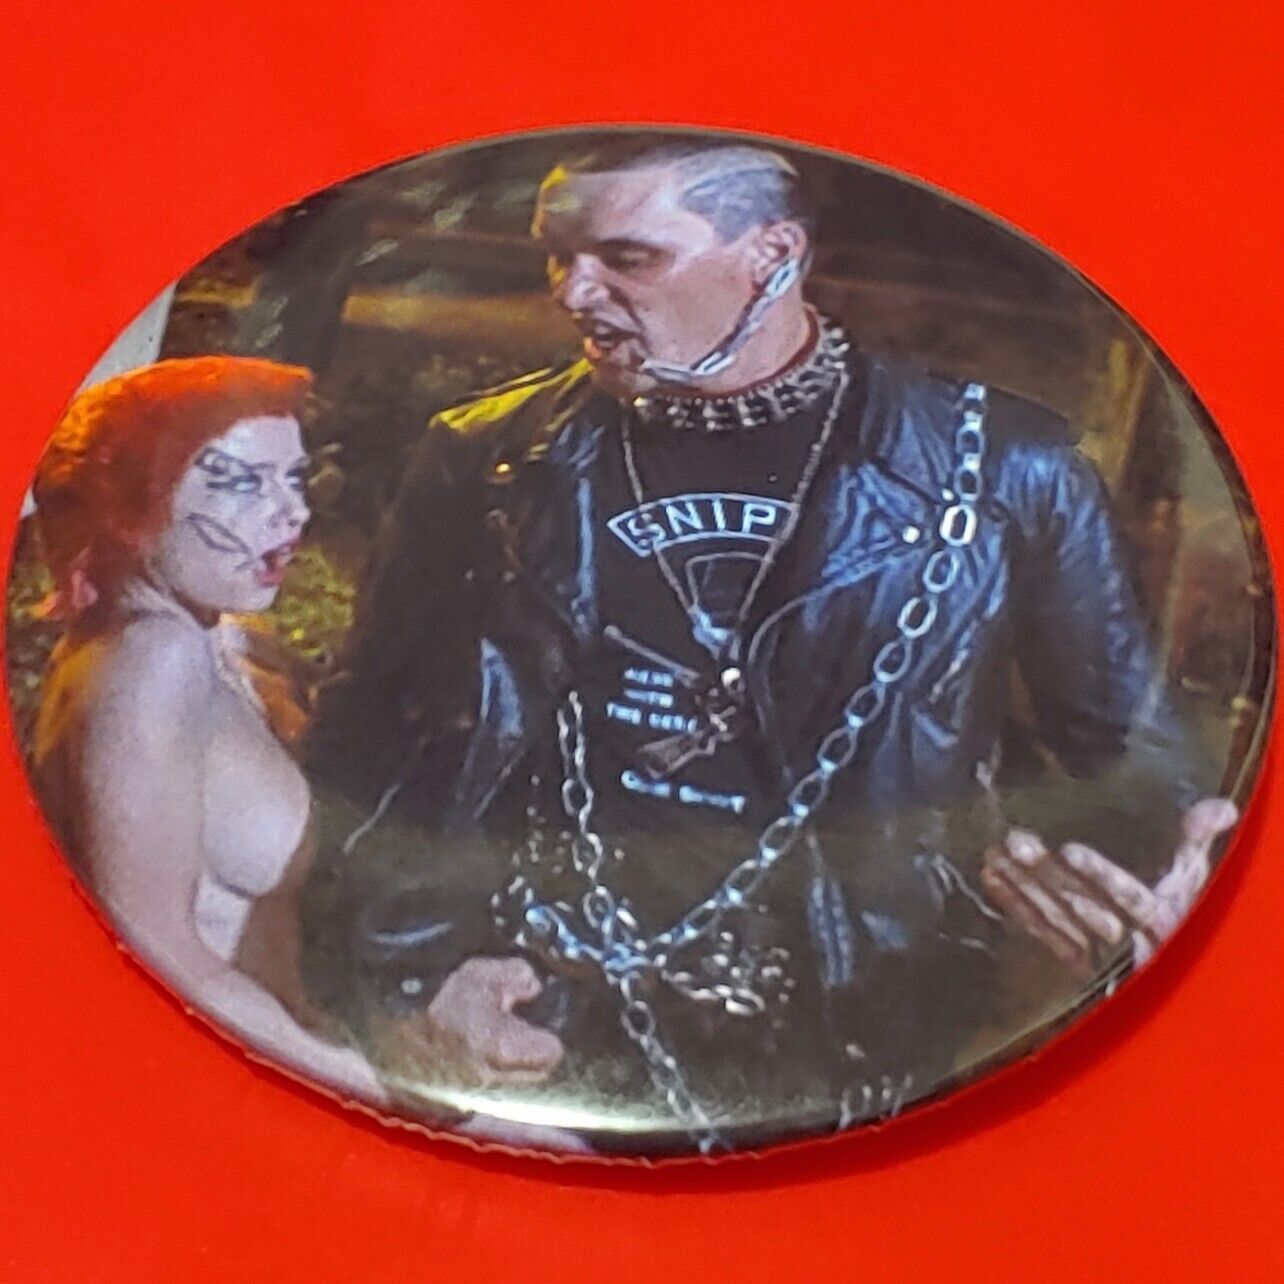 2 1/4 Inch Suicide & Trash Return Of The Living Dead Horror Round Pinback Button